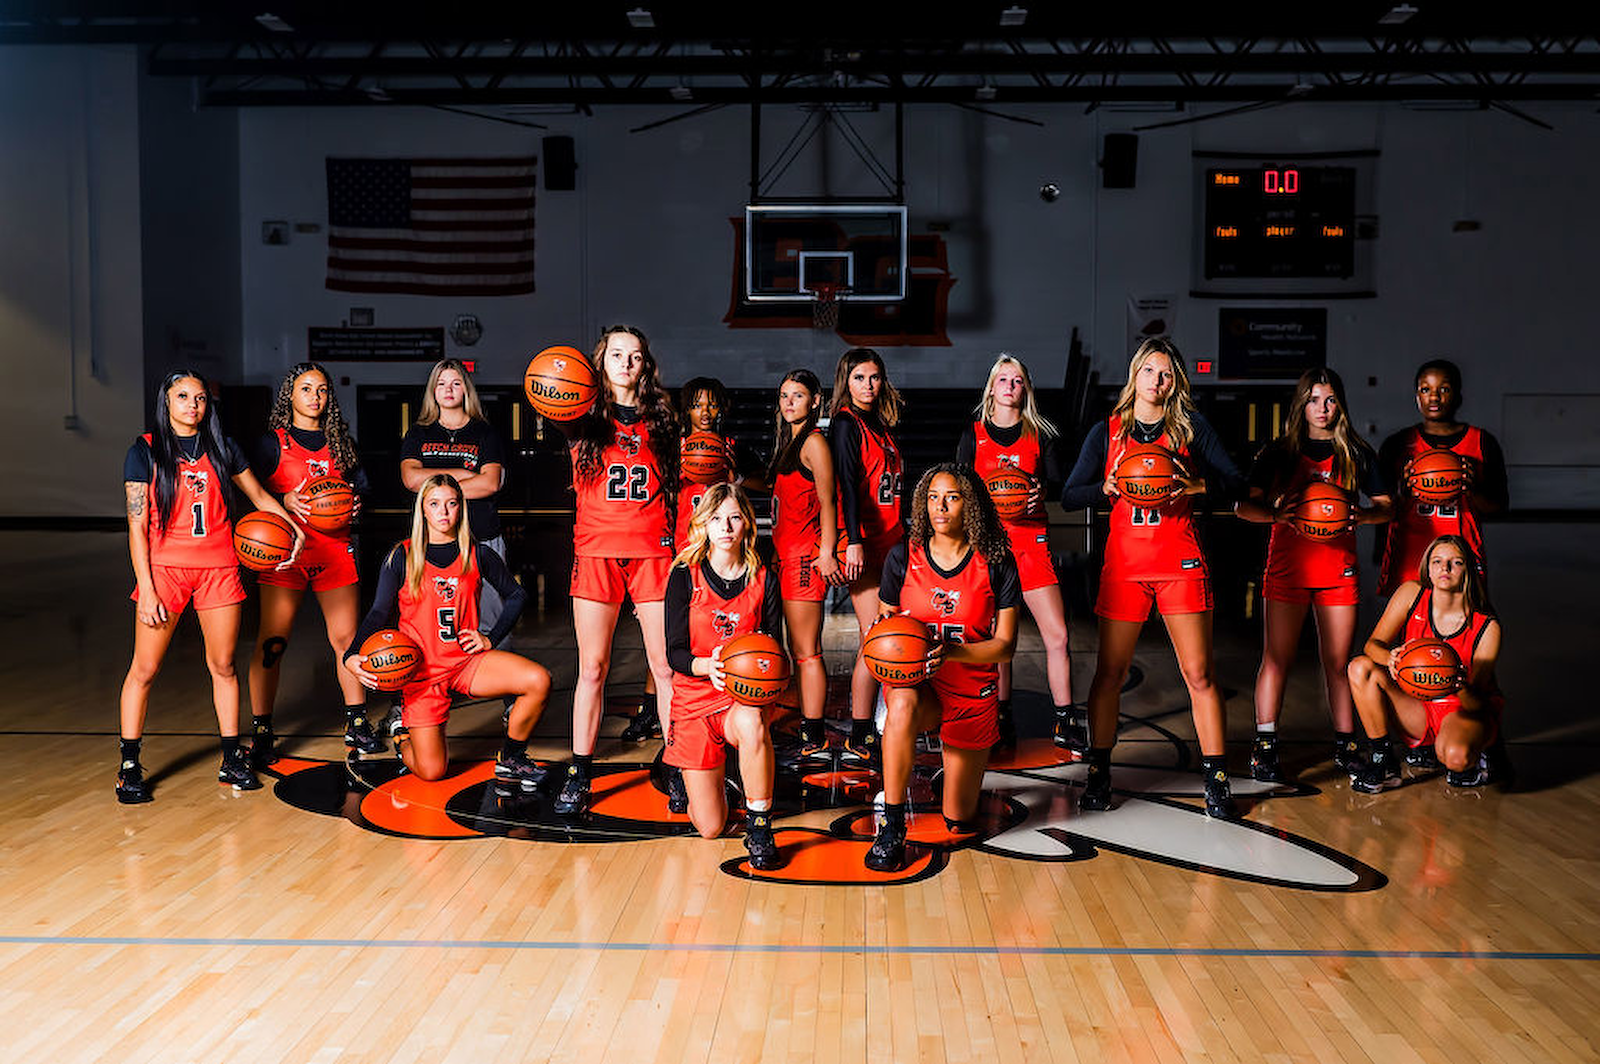 Girls' Basketball Media Day (photos) gallery cover photo